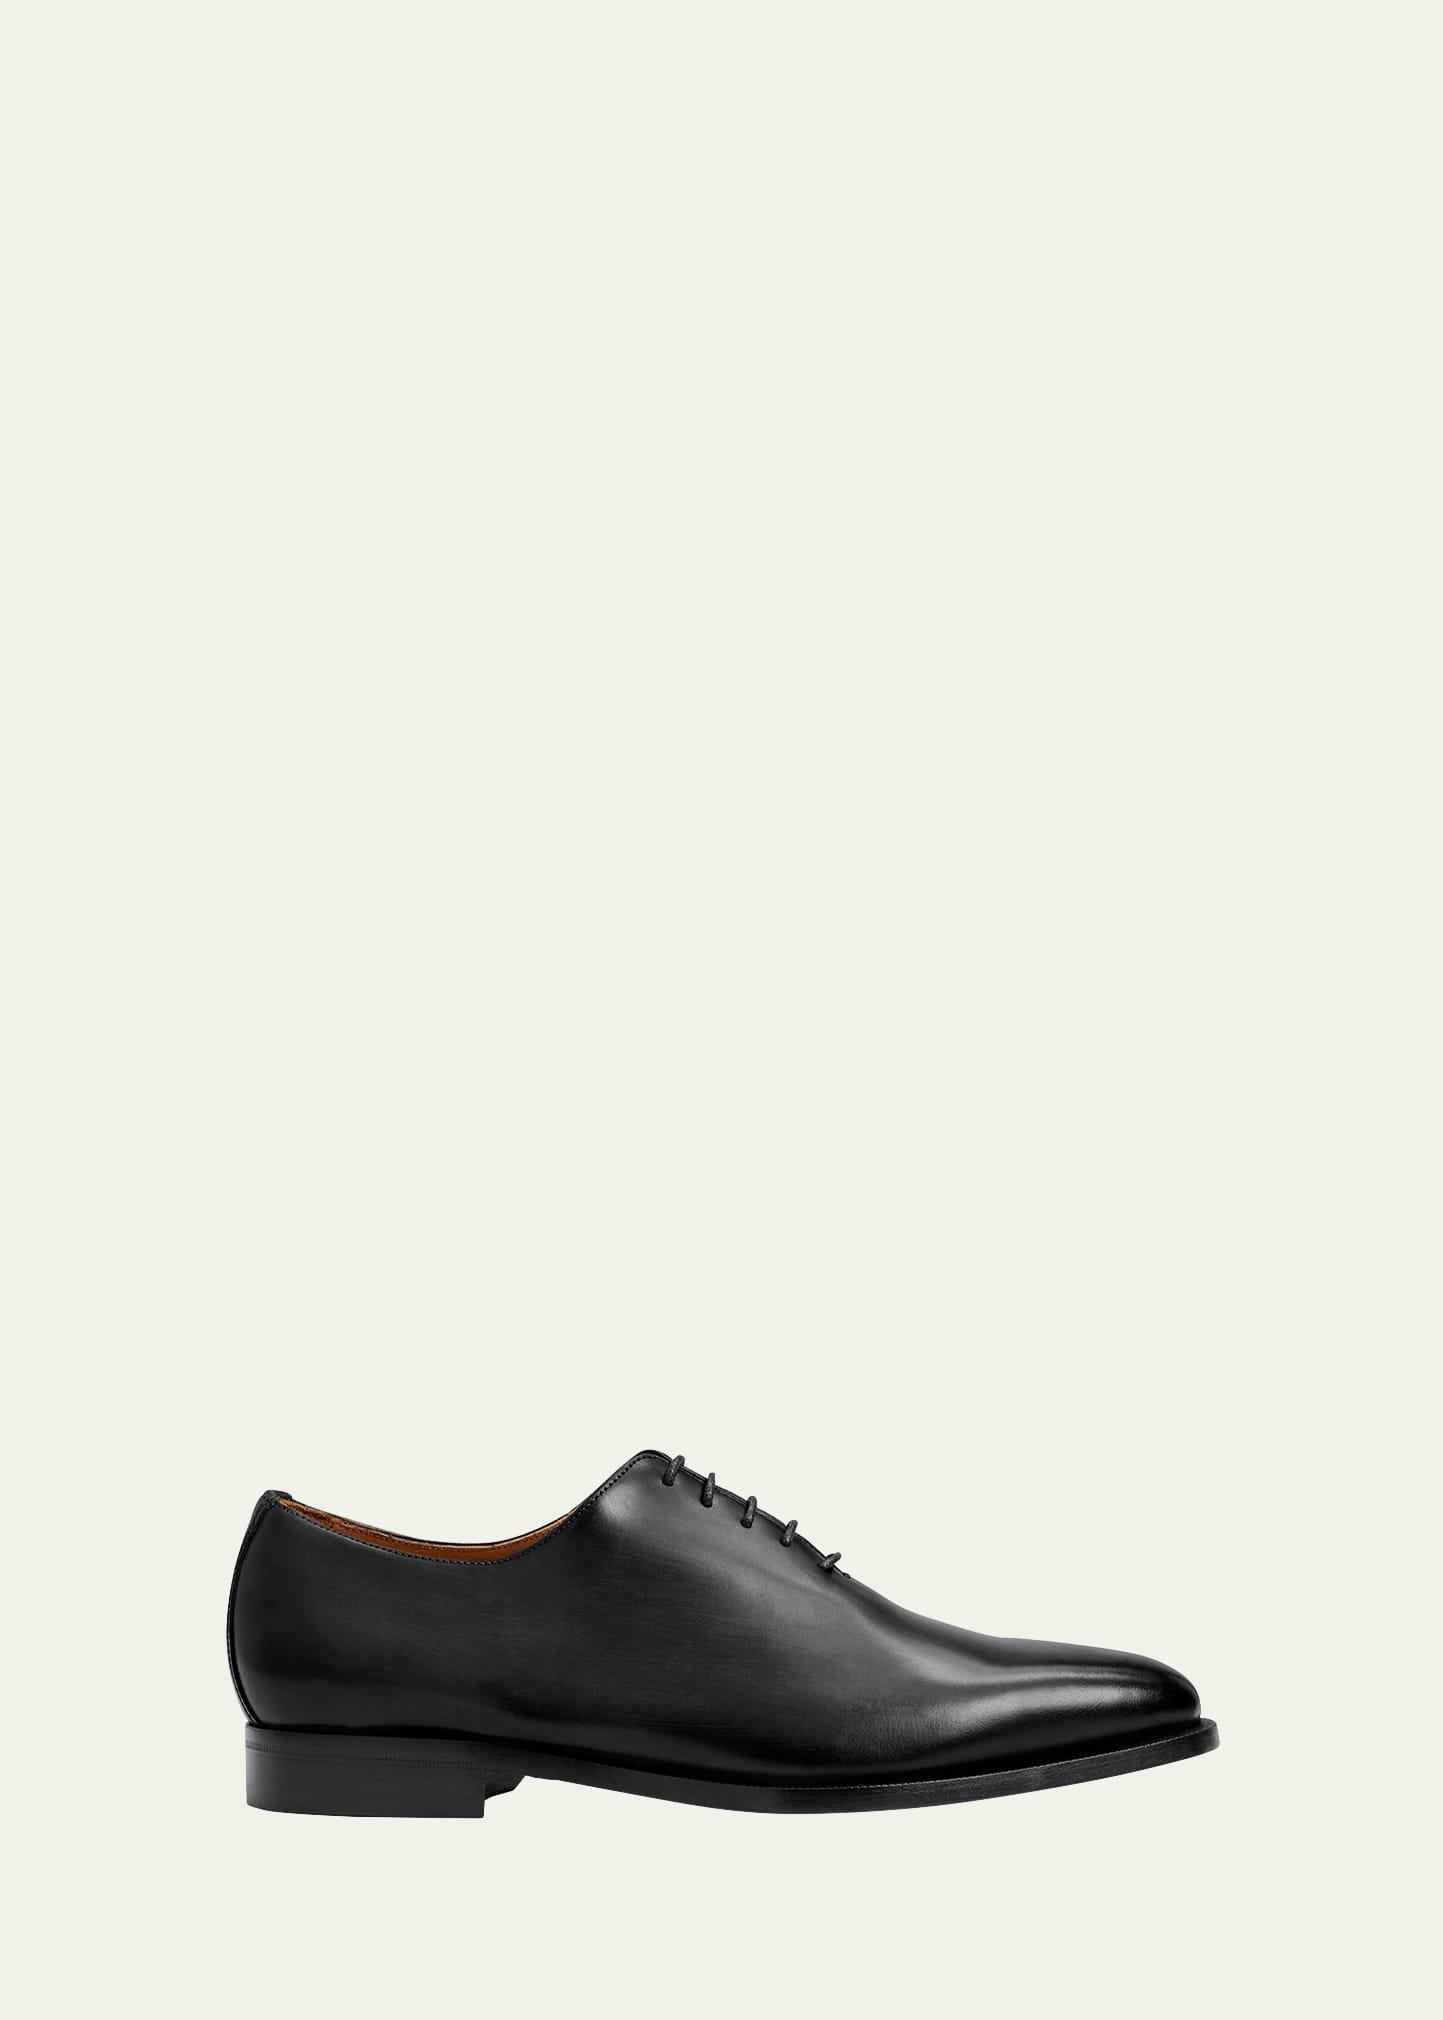 ZEGNA Vienna Evening Wholecut Oxford Product Image